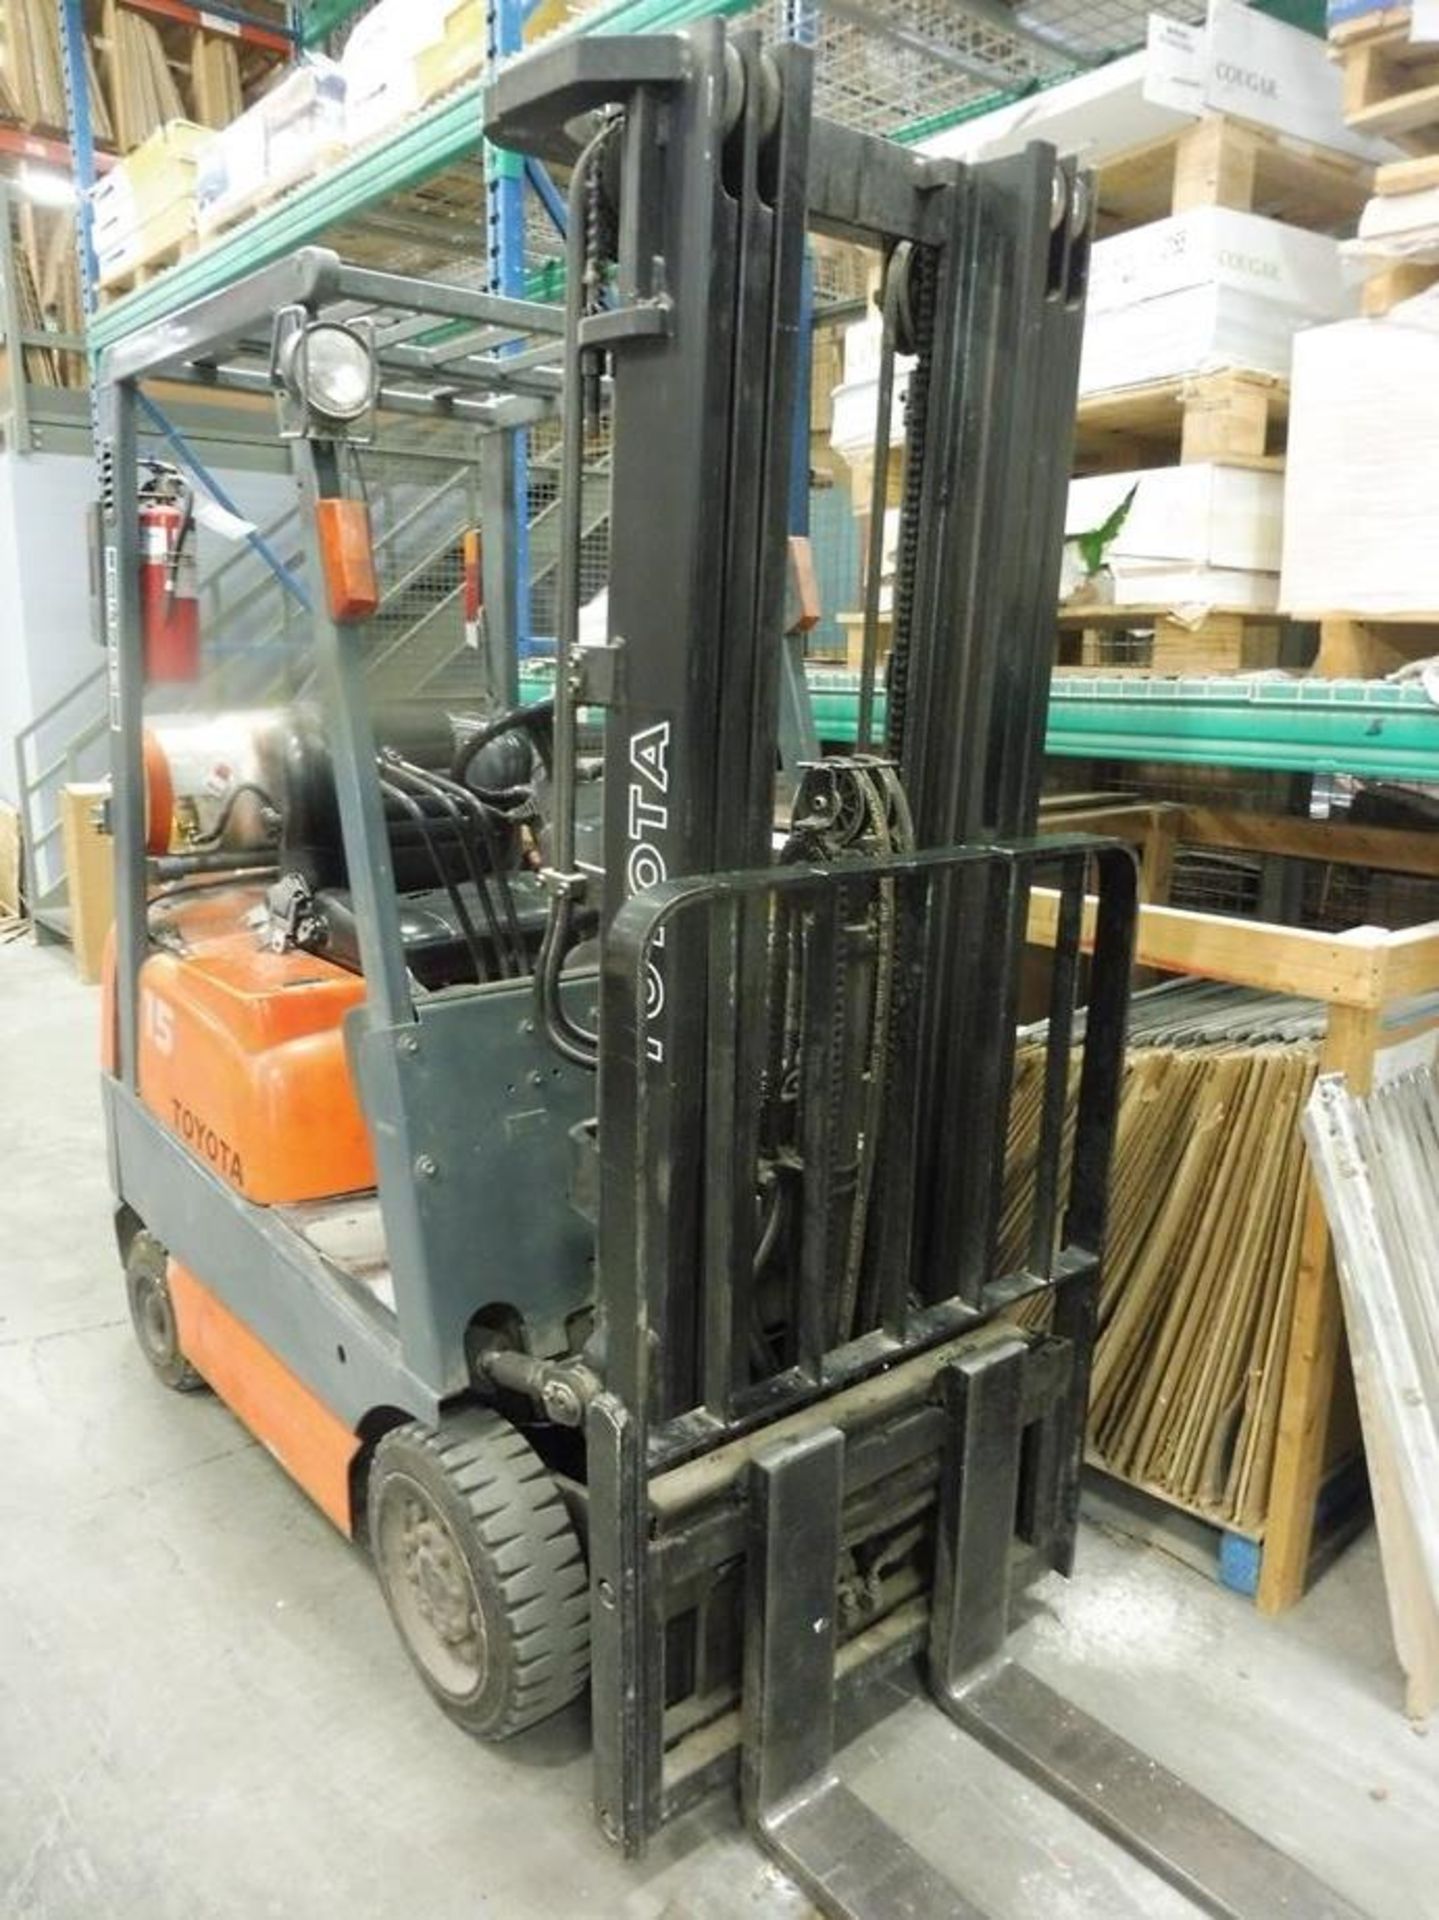 TOYOTA "42-6F-GCU15" Propane Powered Forklift Truck, S/N: 63047, 2,800LB Capacity, 3-Stage Mast,